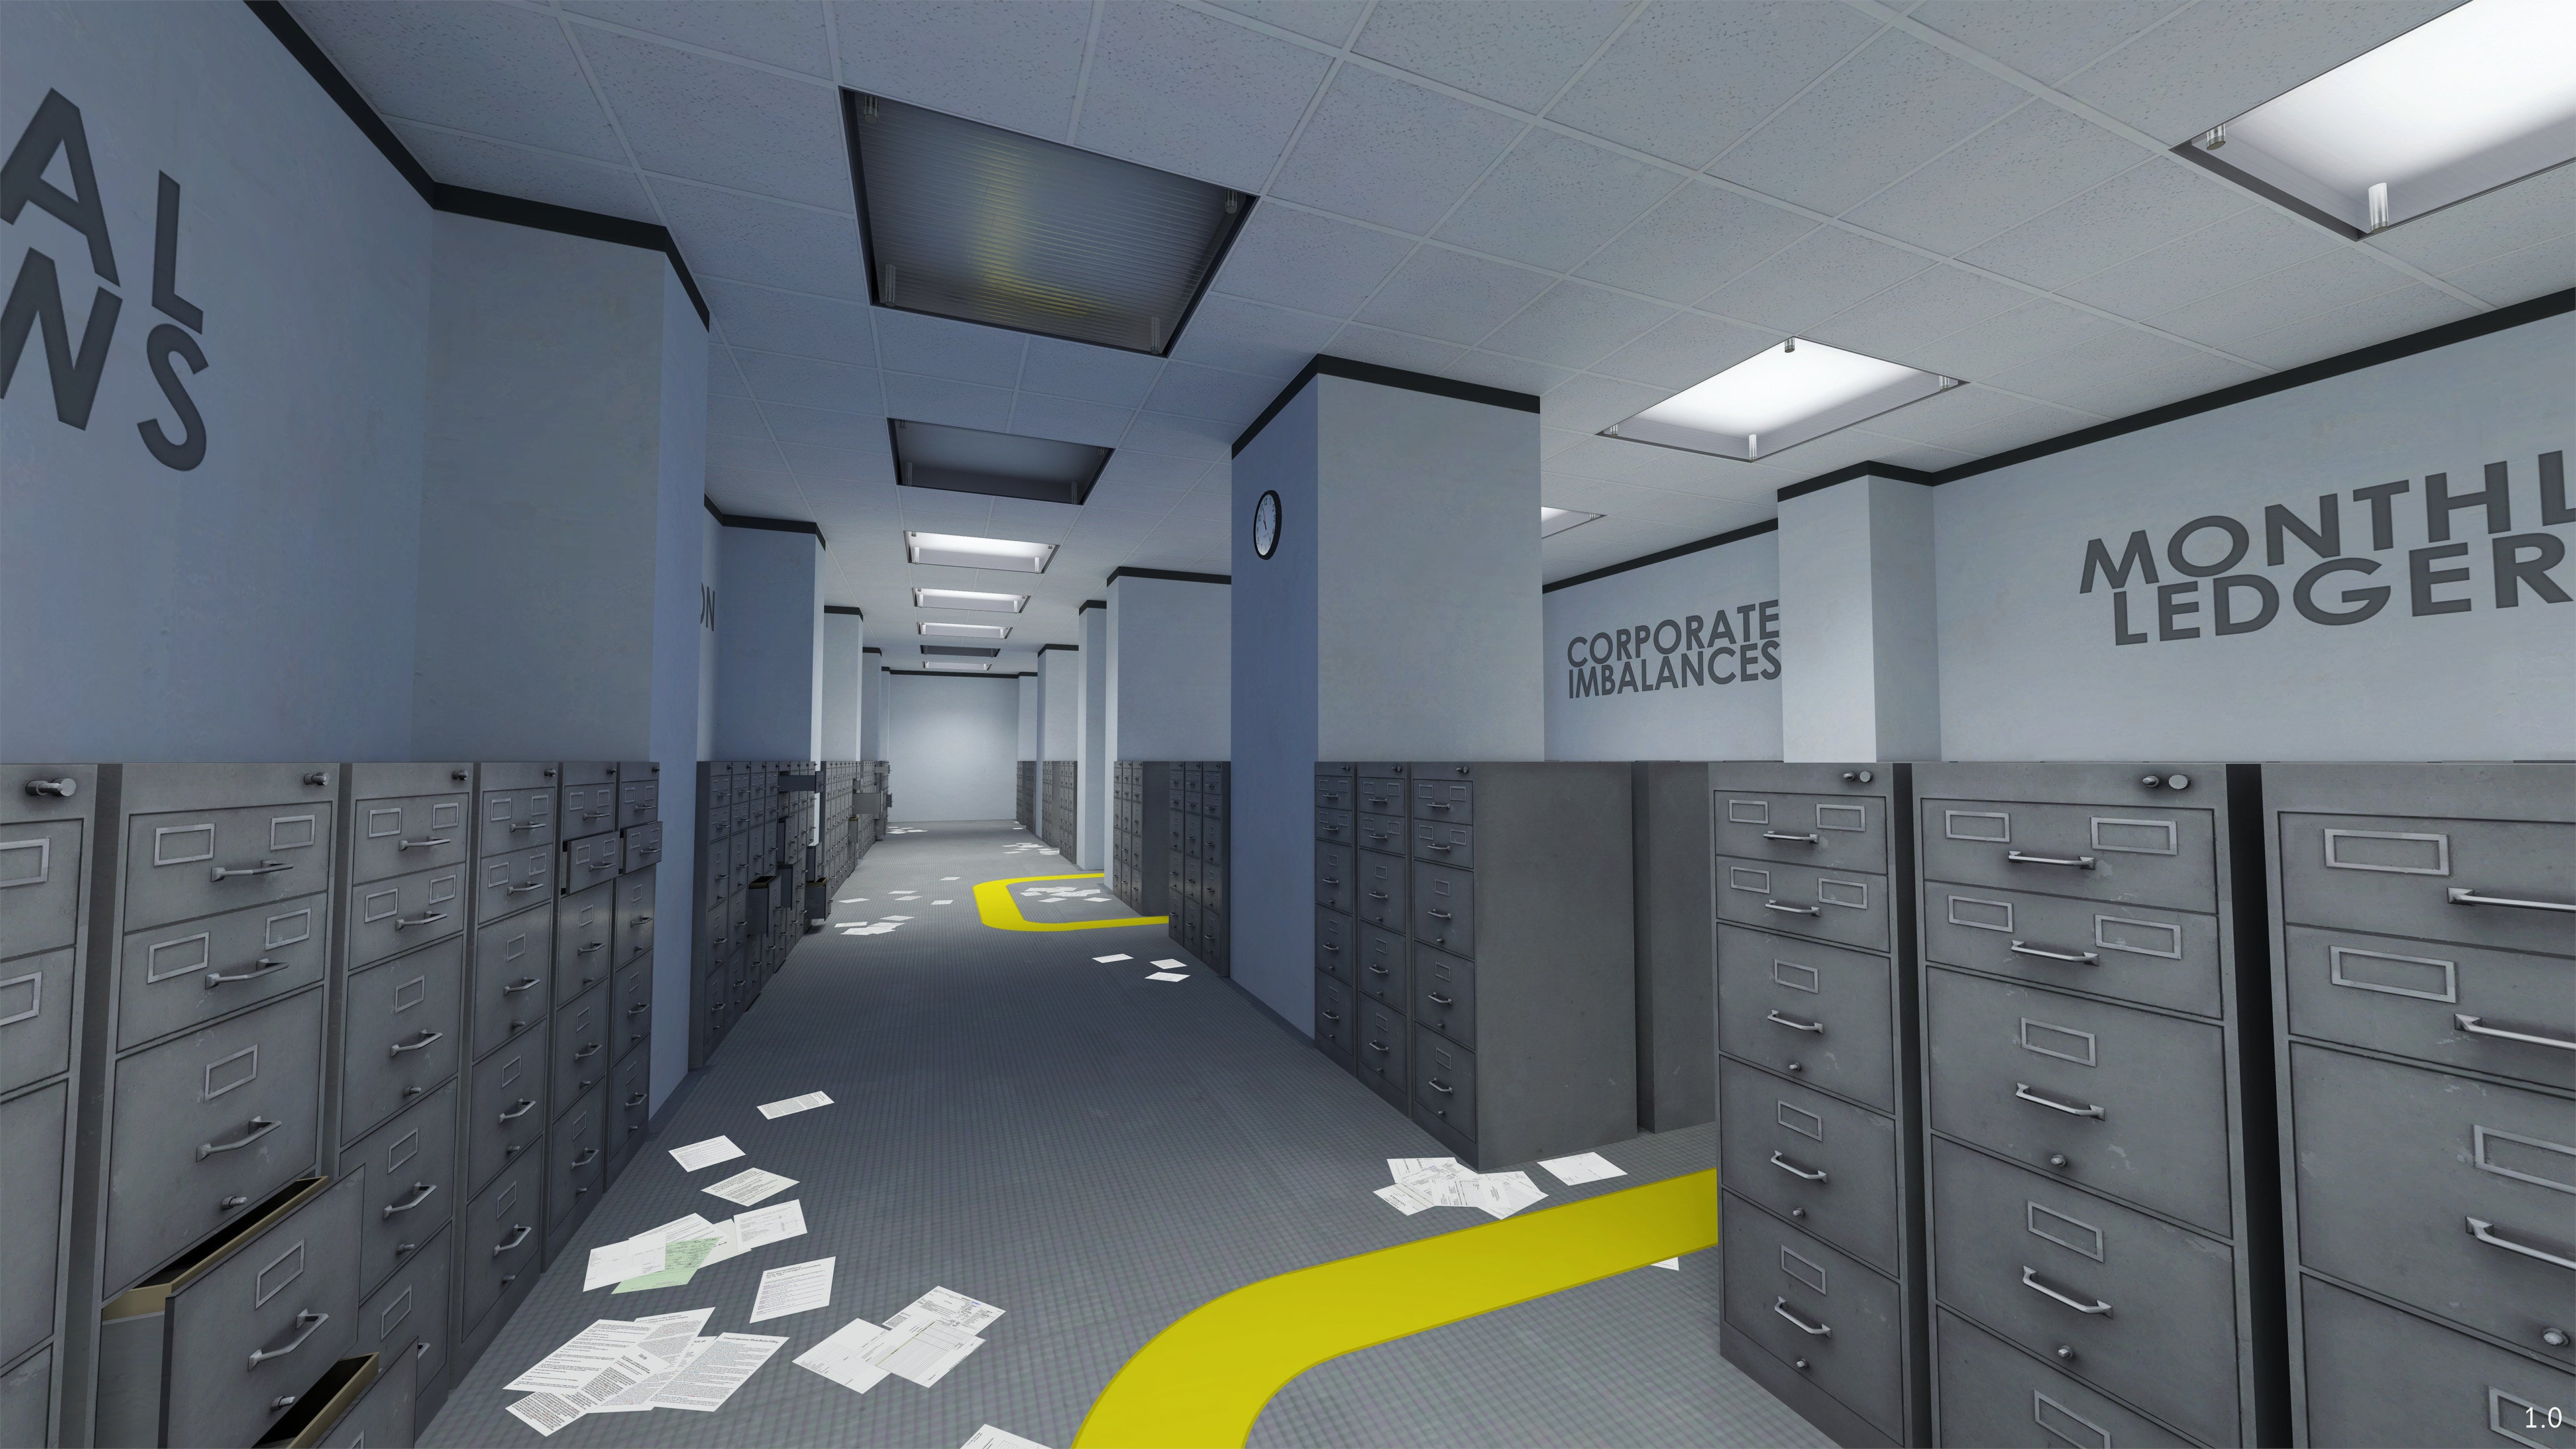 A yellow line meanders through disorderly office in a The Stanley Parable: Ultra Deluxe screenshot.